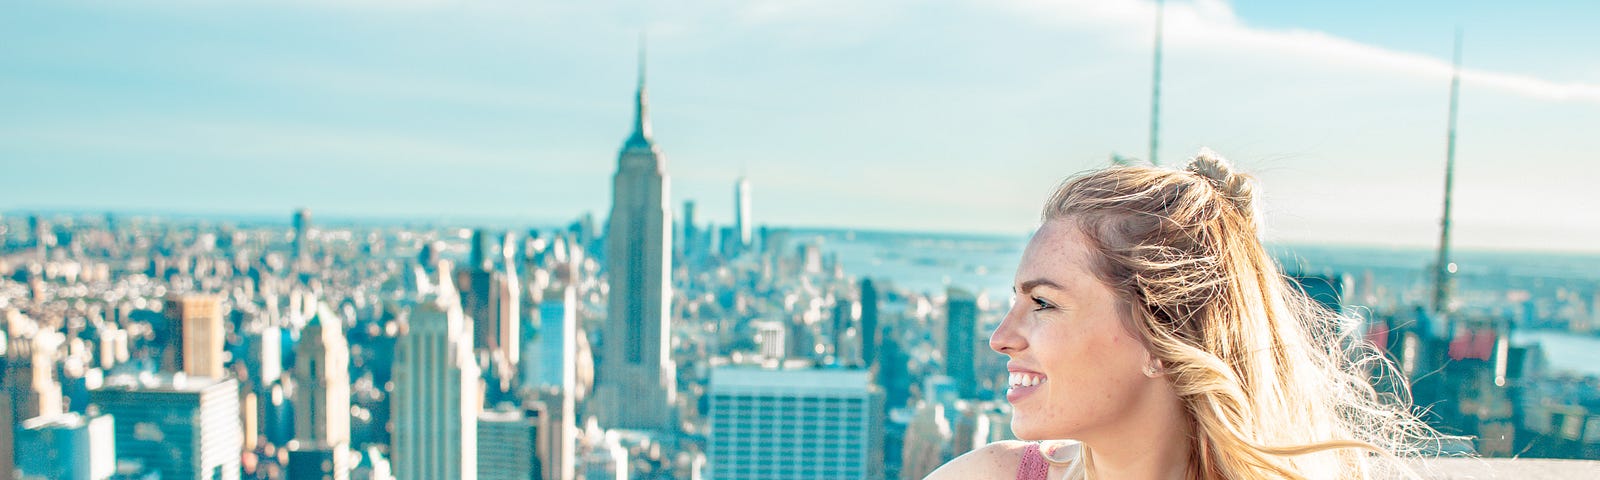 Pretty blond girl overlooking Empire State Building